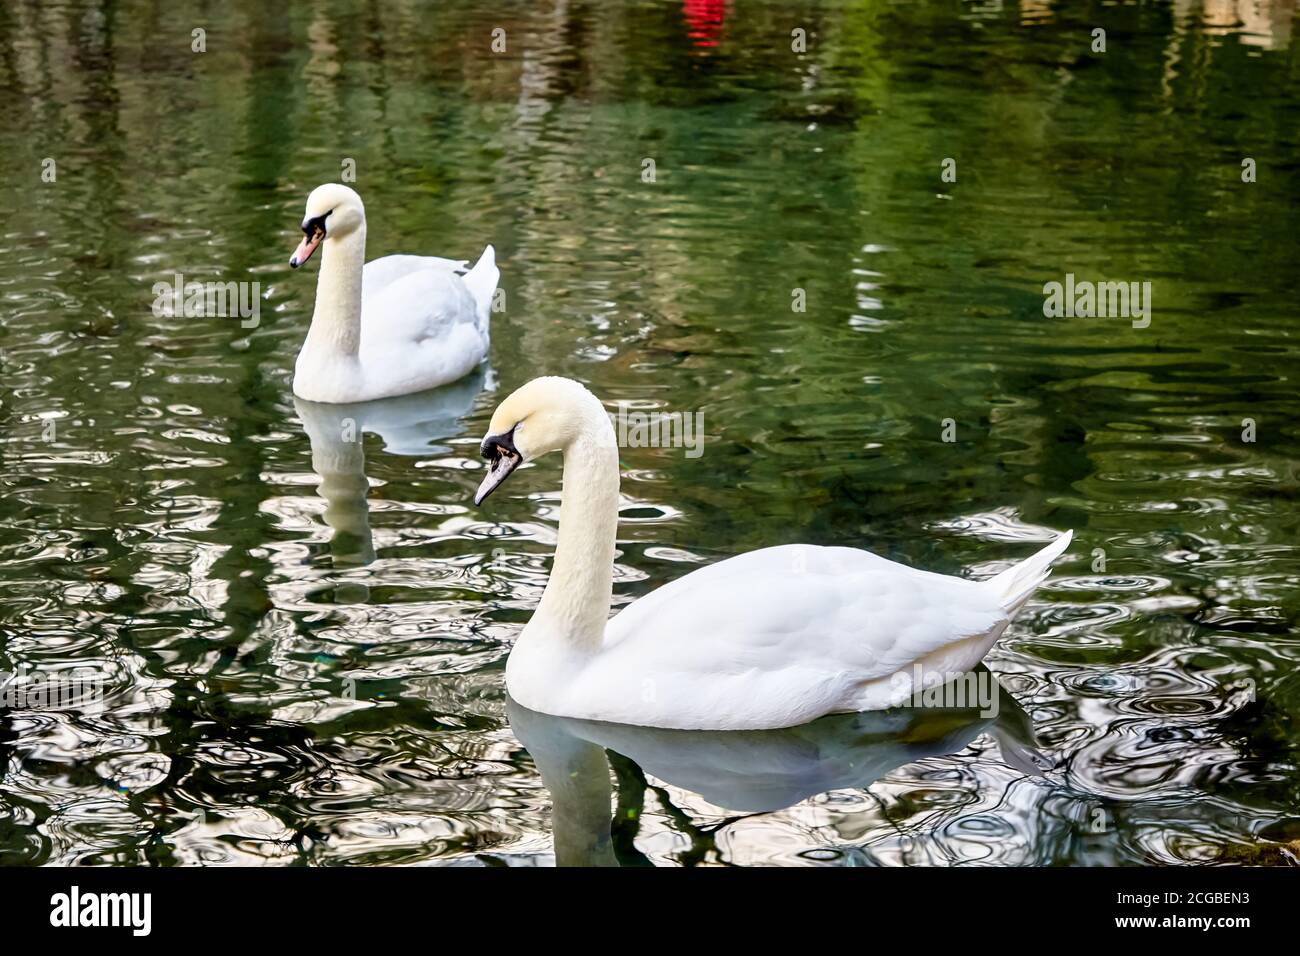 White swans swim in a pond with green water Stock Photo